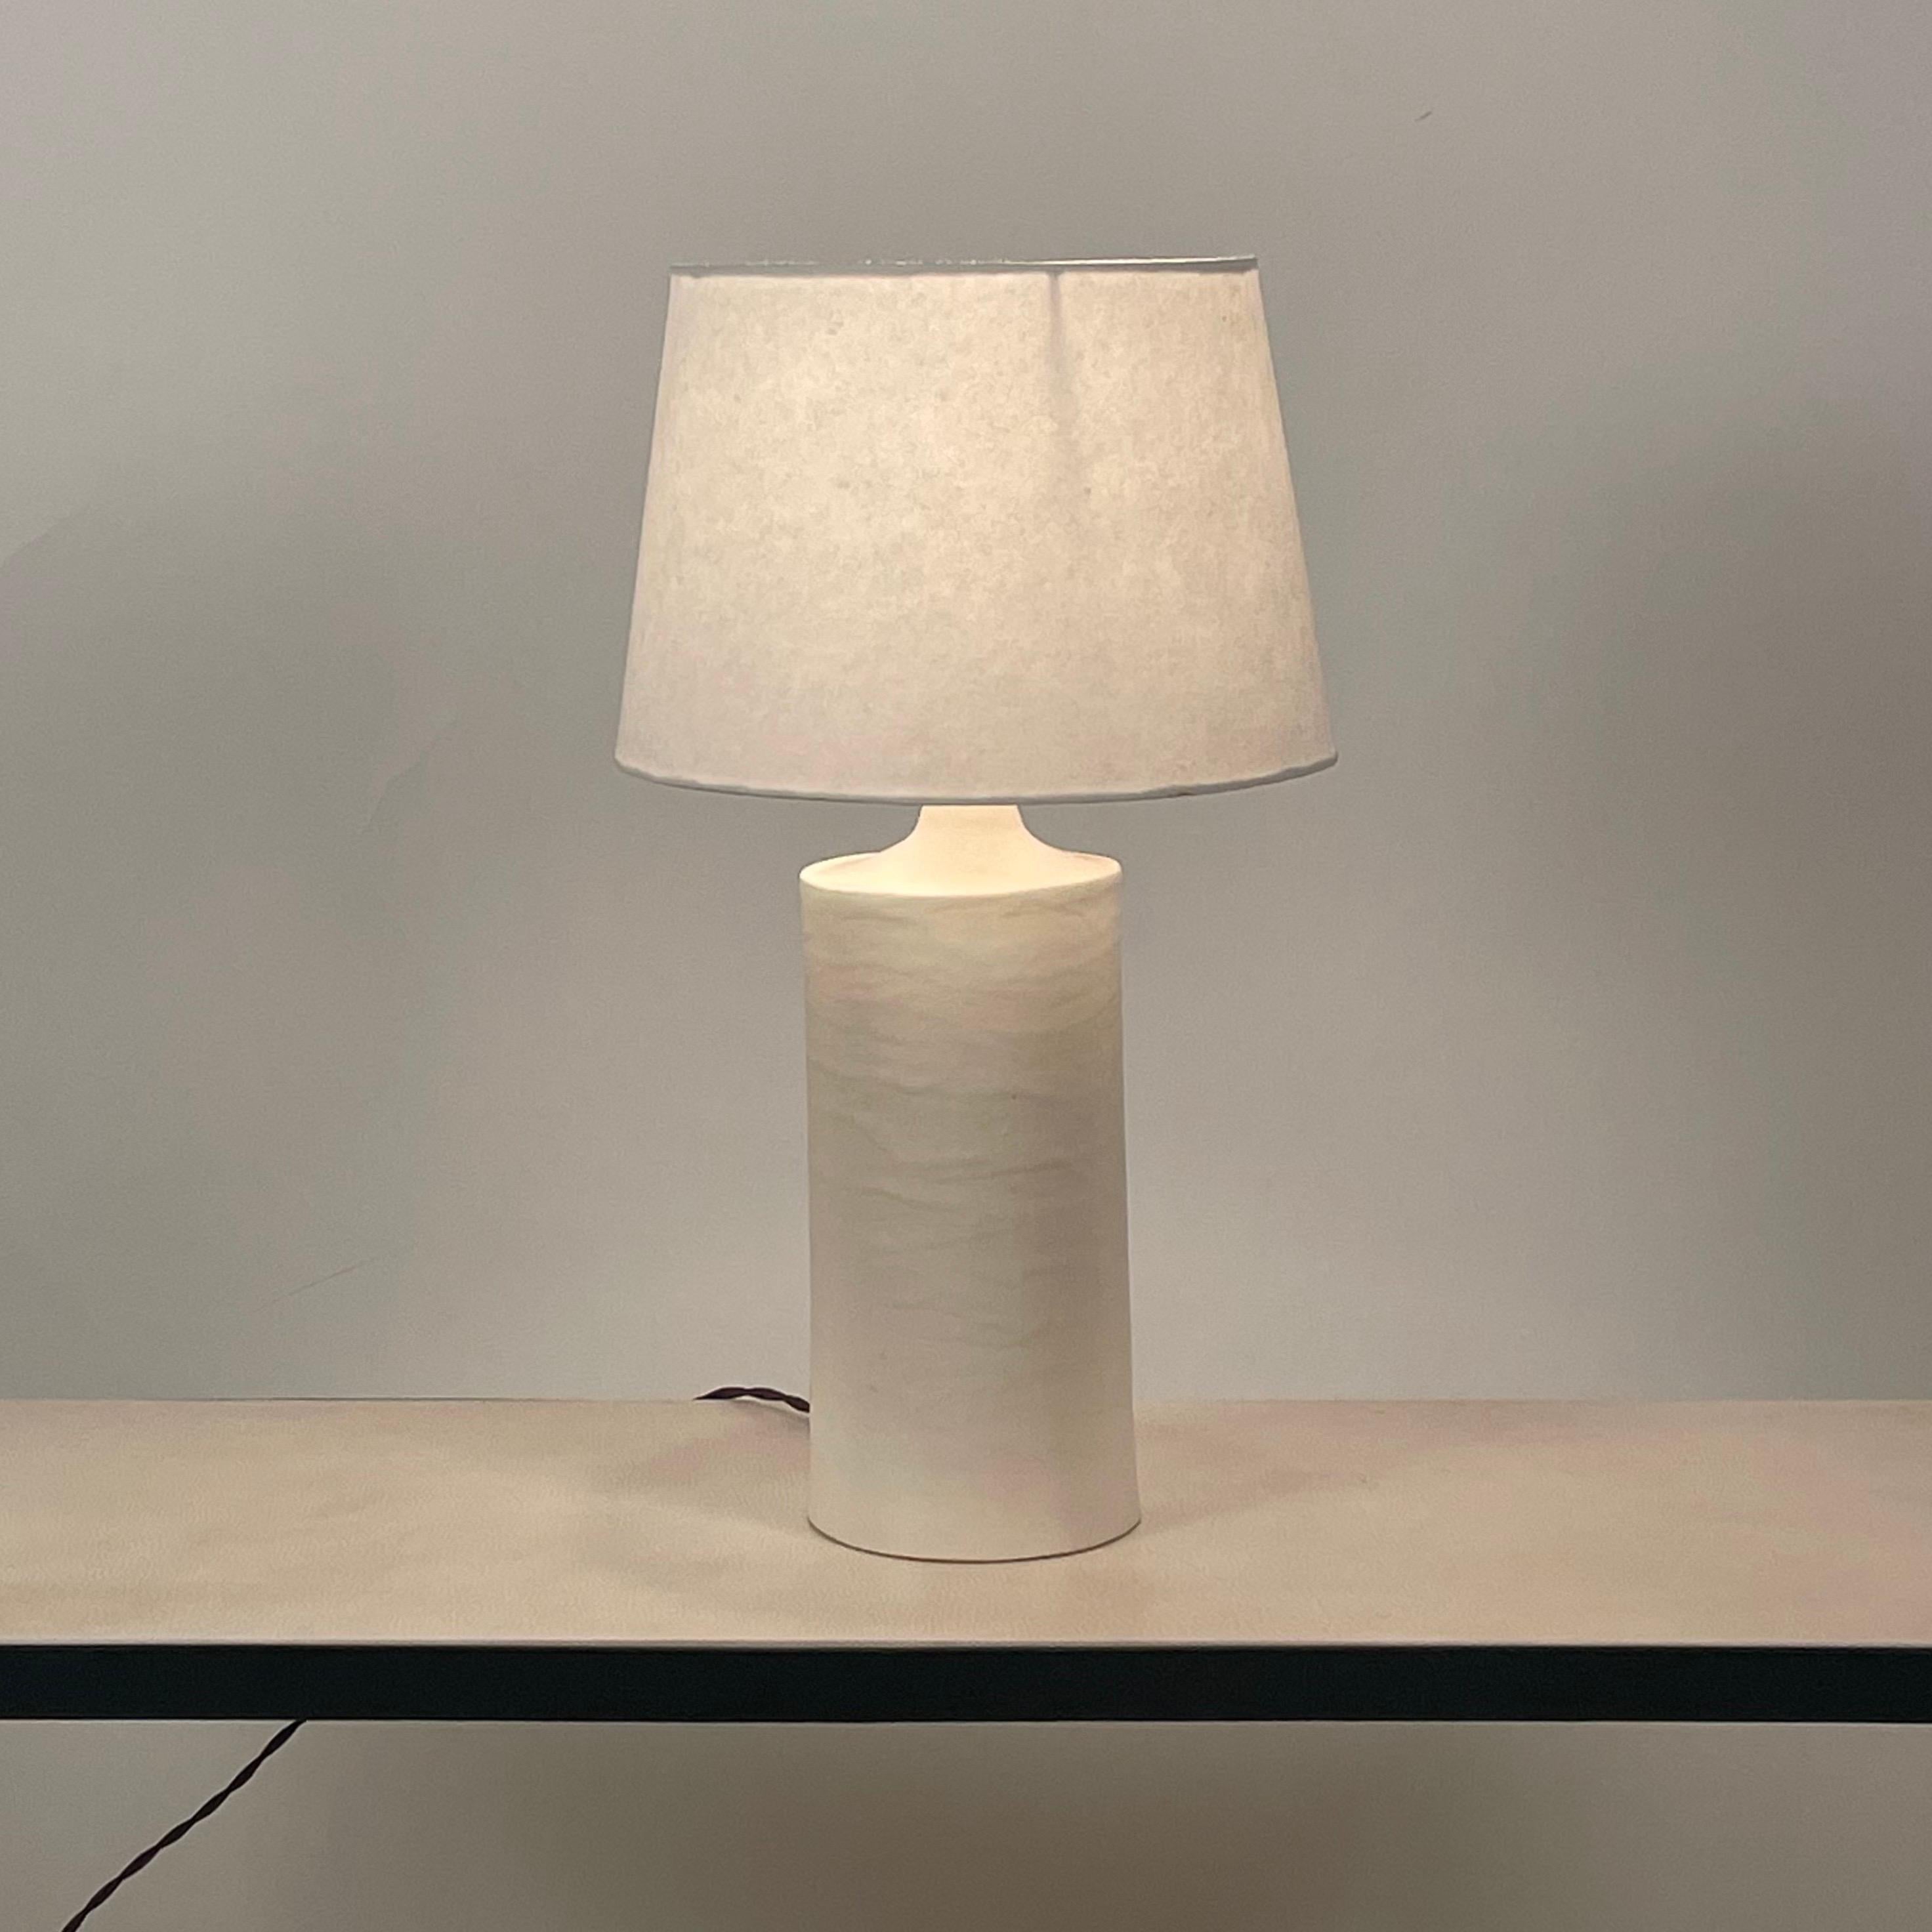 Perfect where a small, understated lamp is desired.

Dimensions listed are the overall dimensions of the lamps with the shades.

The shades are 10 in. bottom diameter x 8 in. top diameter x 7 in. tall.